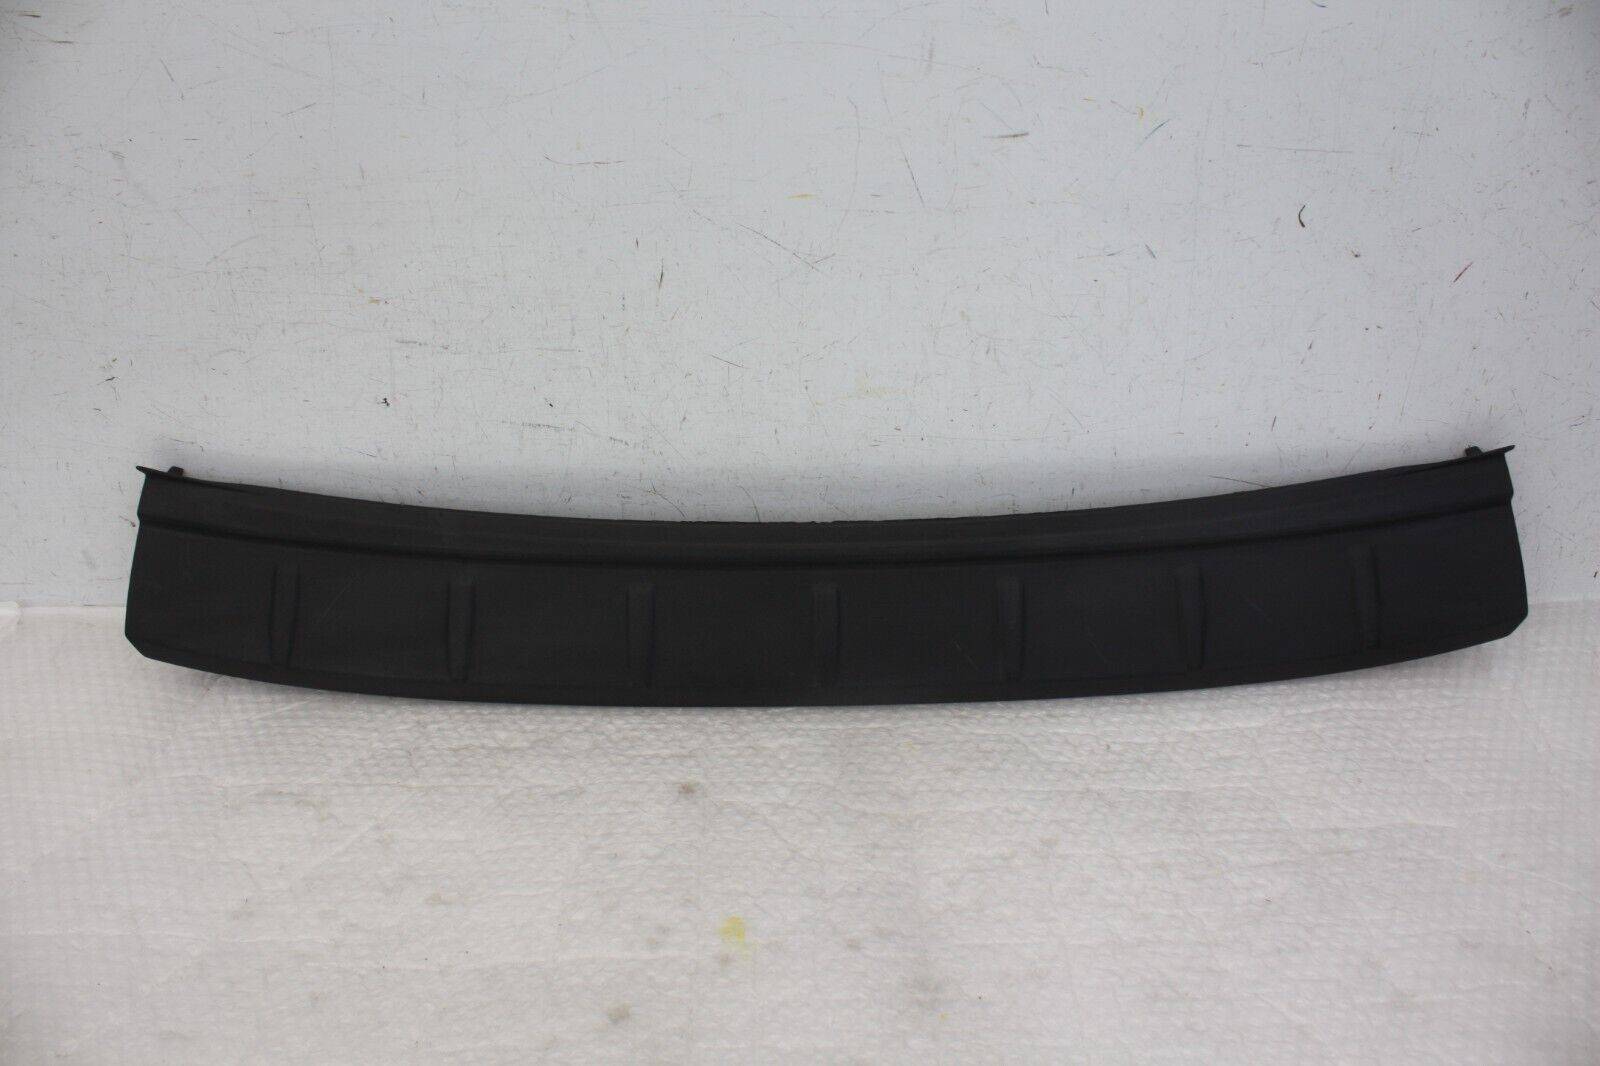 Volvo-XC60-Rear-Bumper-Protection-Cover-30764525-Genuine-FIXING-DAMAGED-176362657810